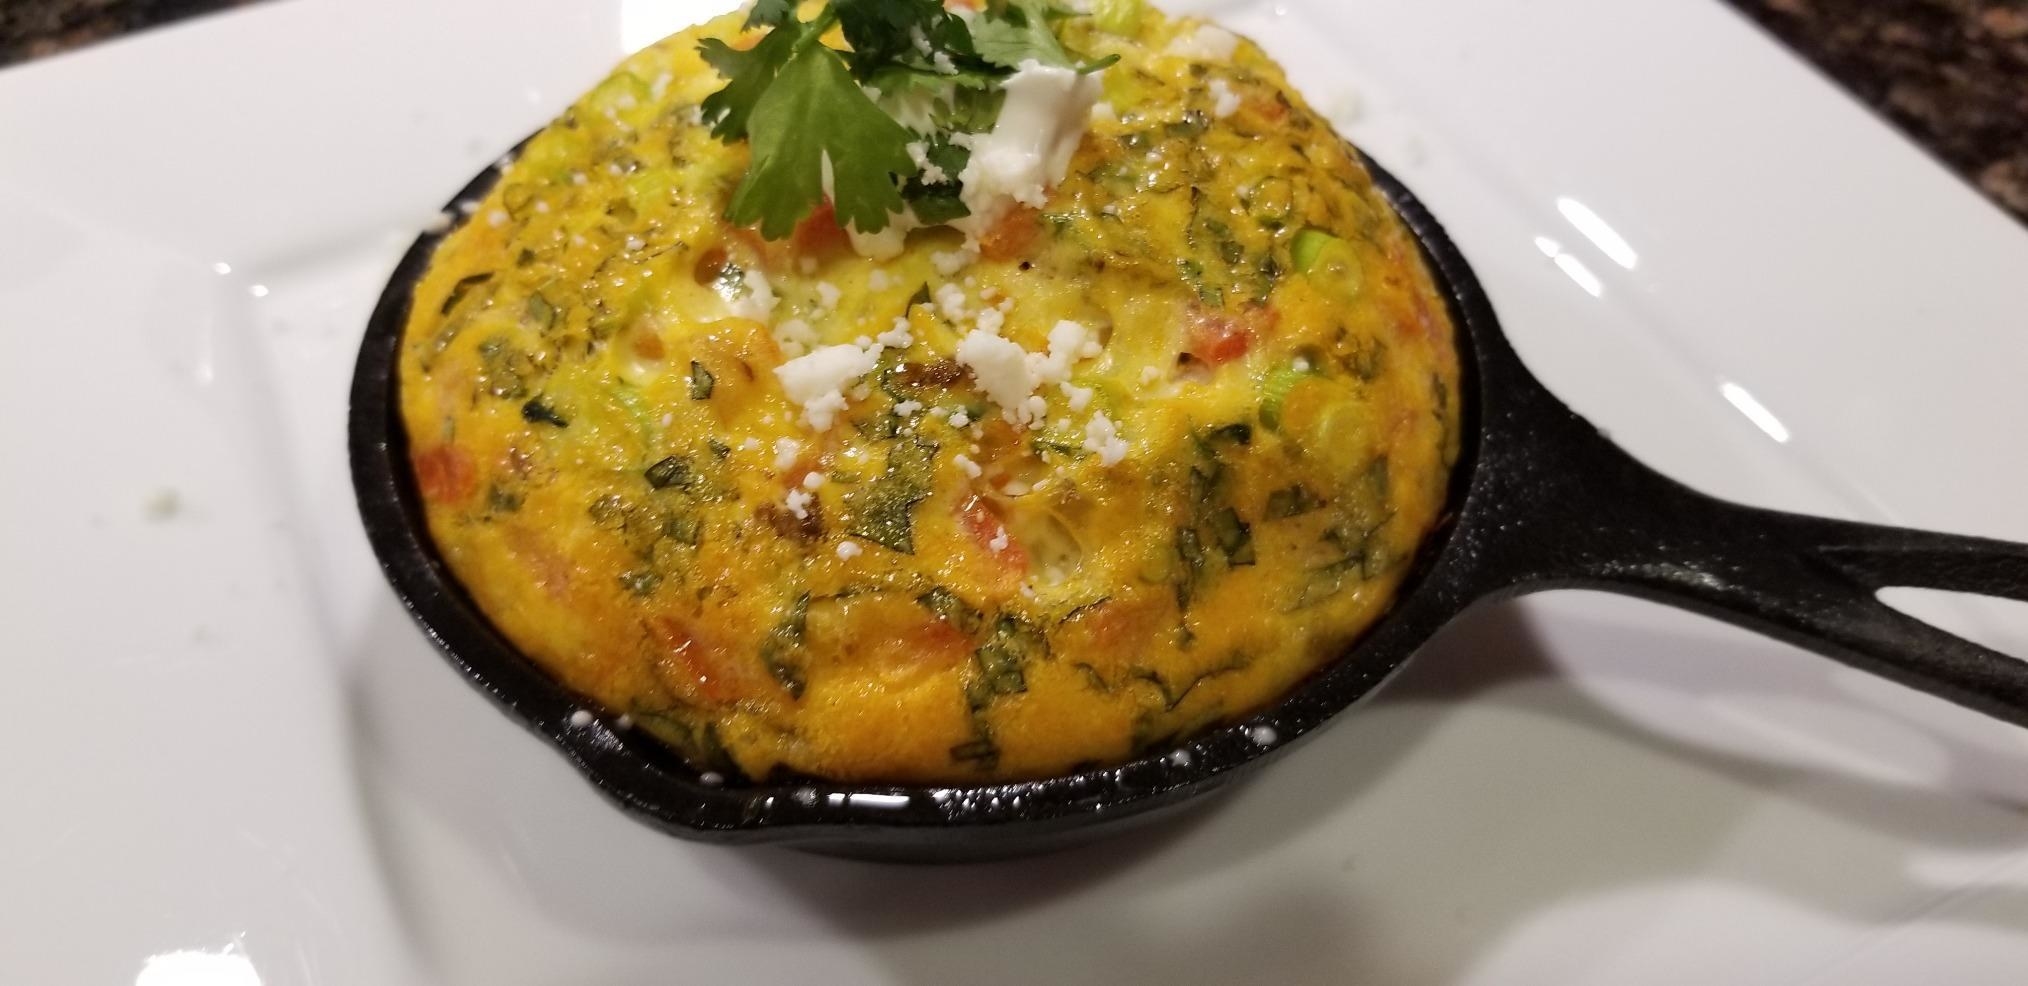 Reviewer using the skillet to make a fritatta